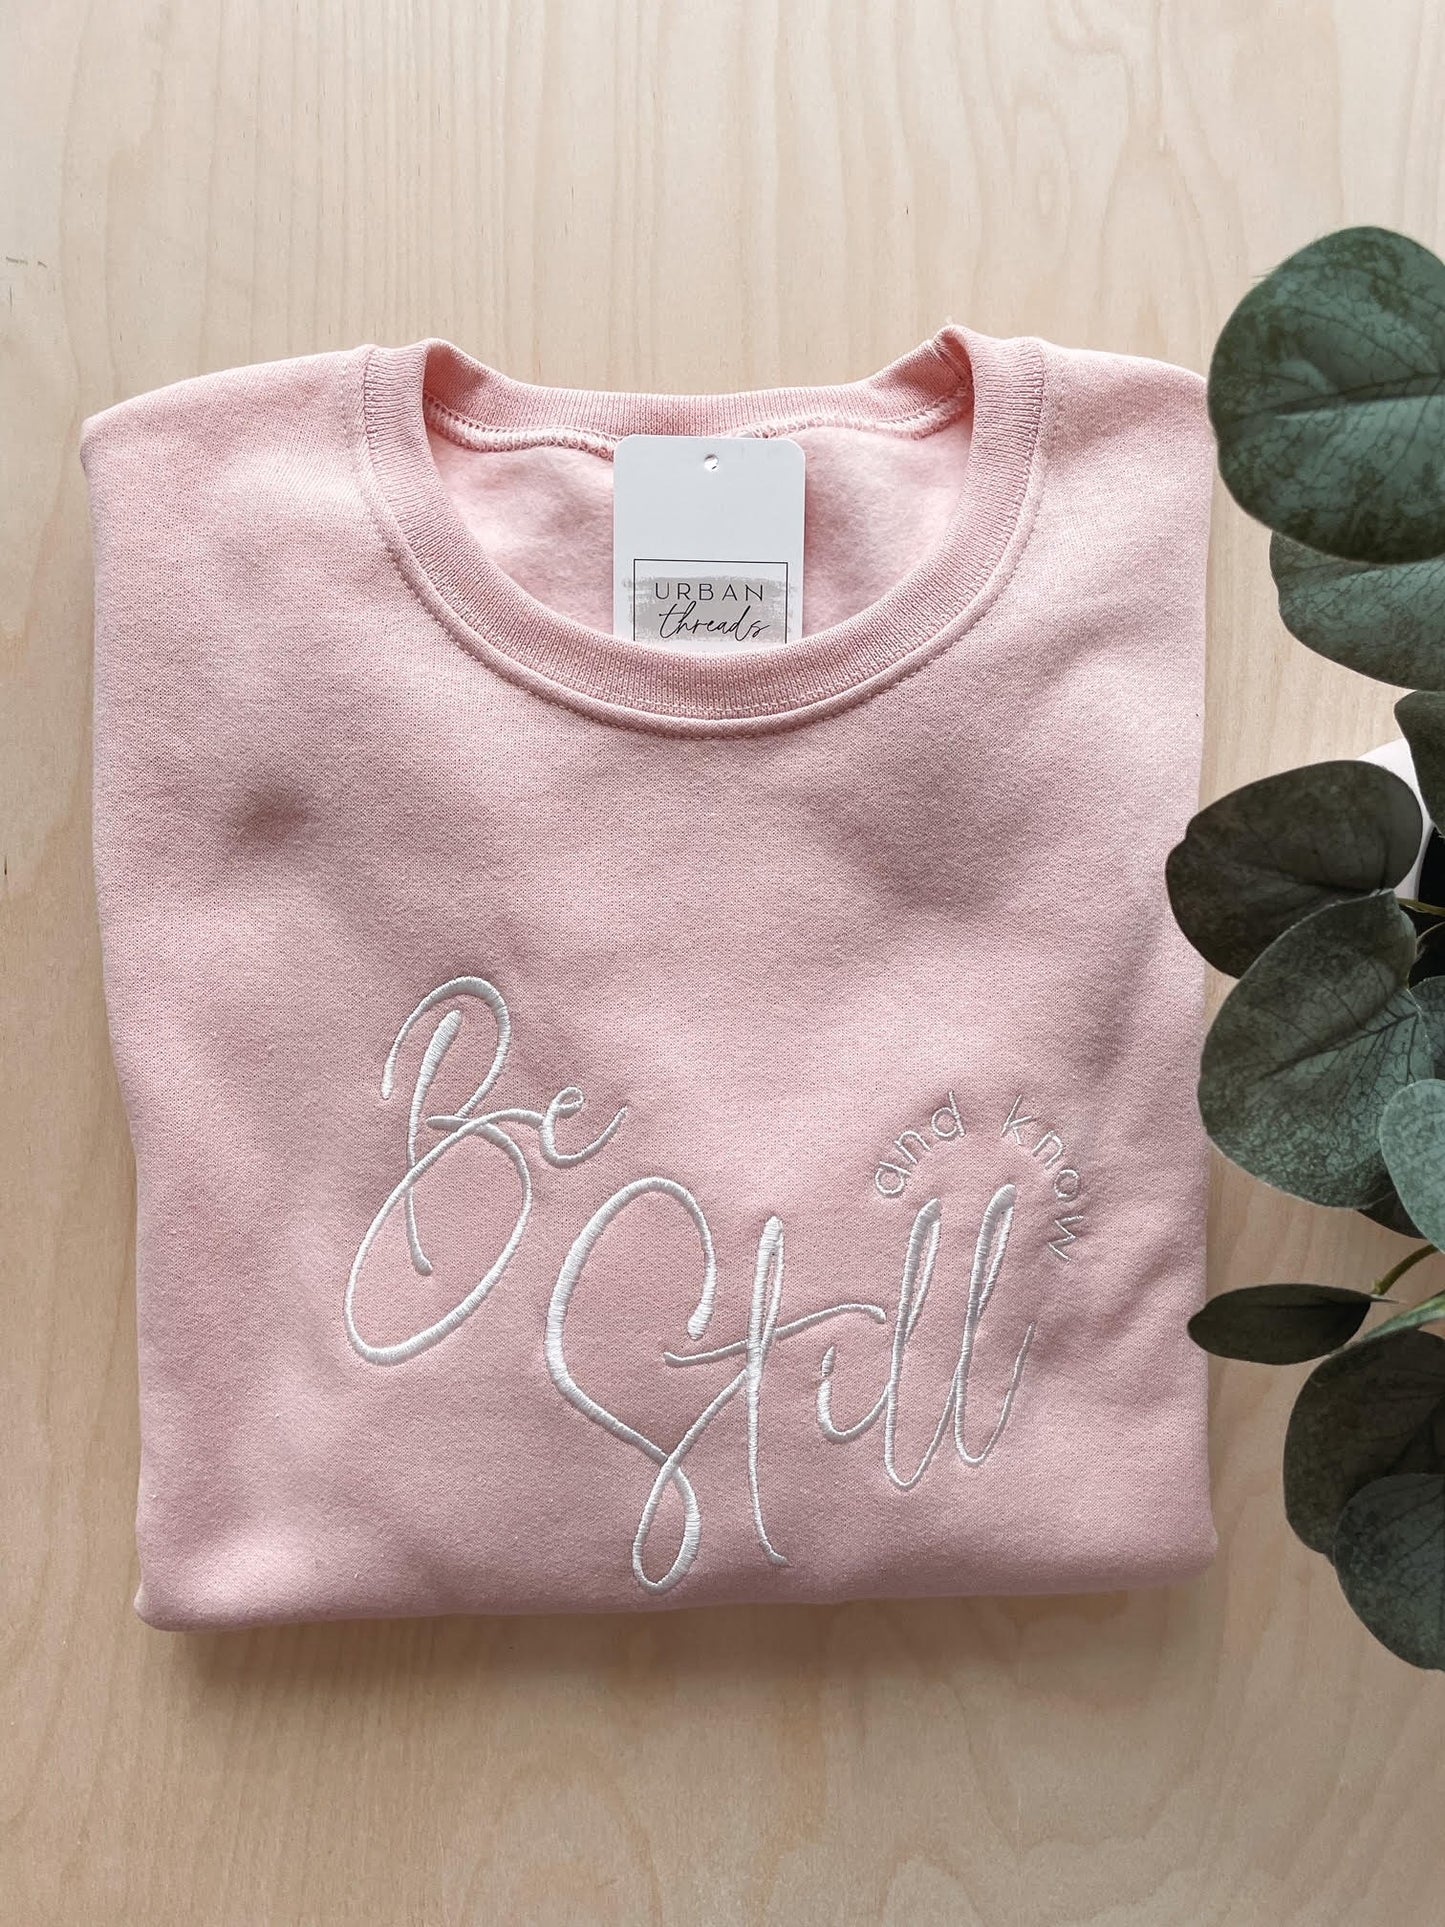 Be Still and Know Embroidered Sweatshirt